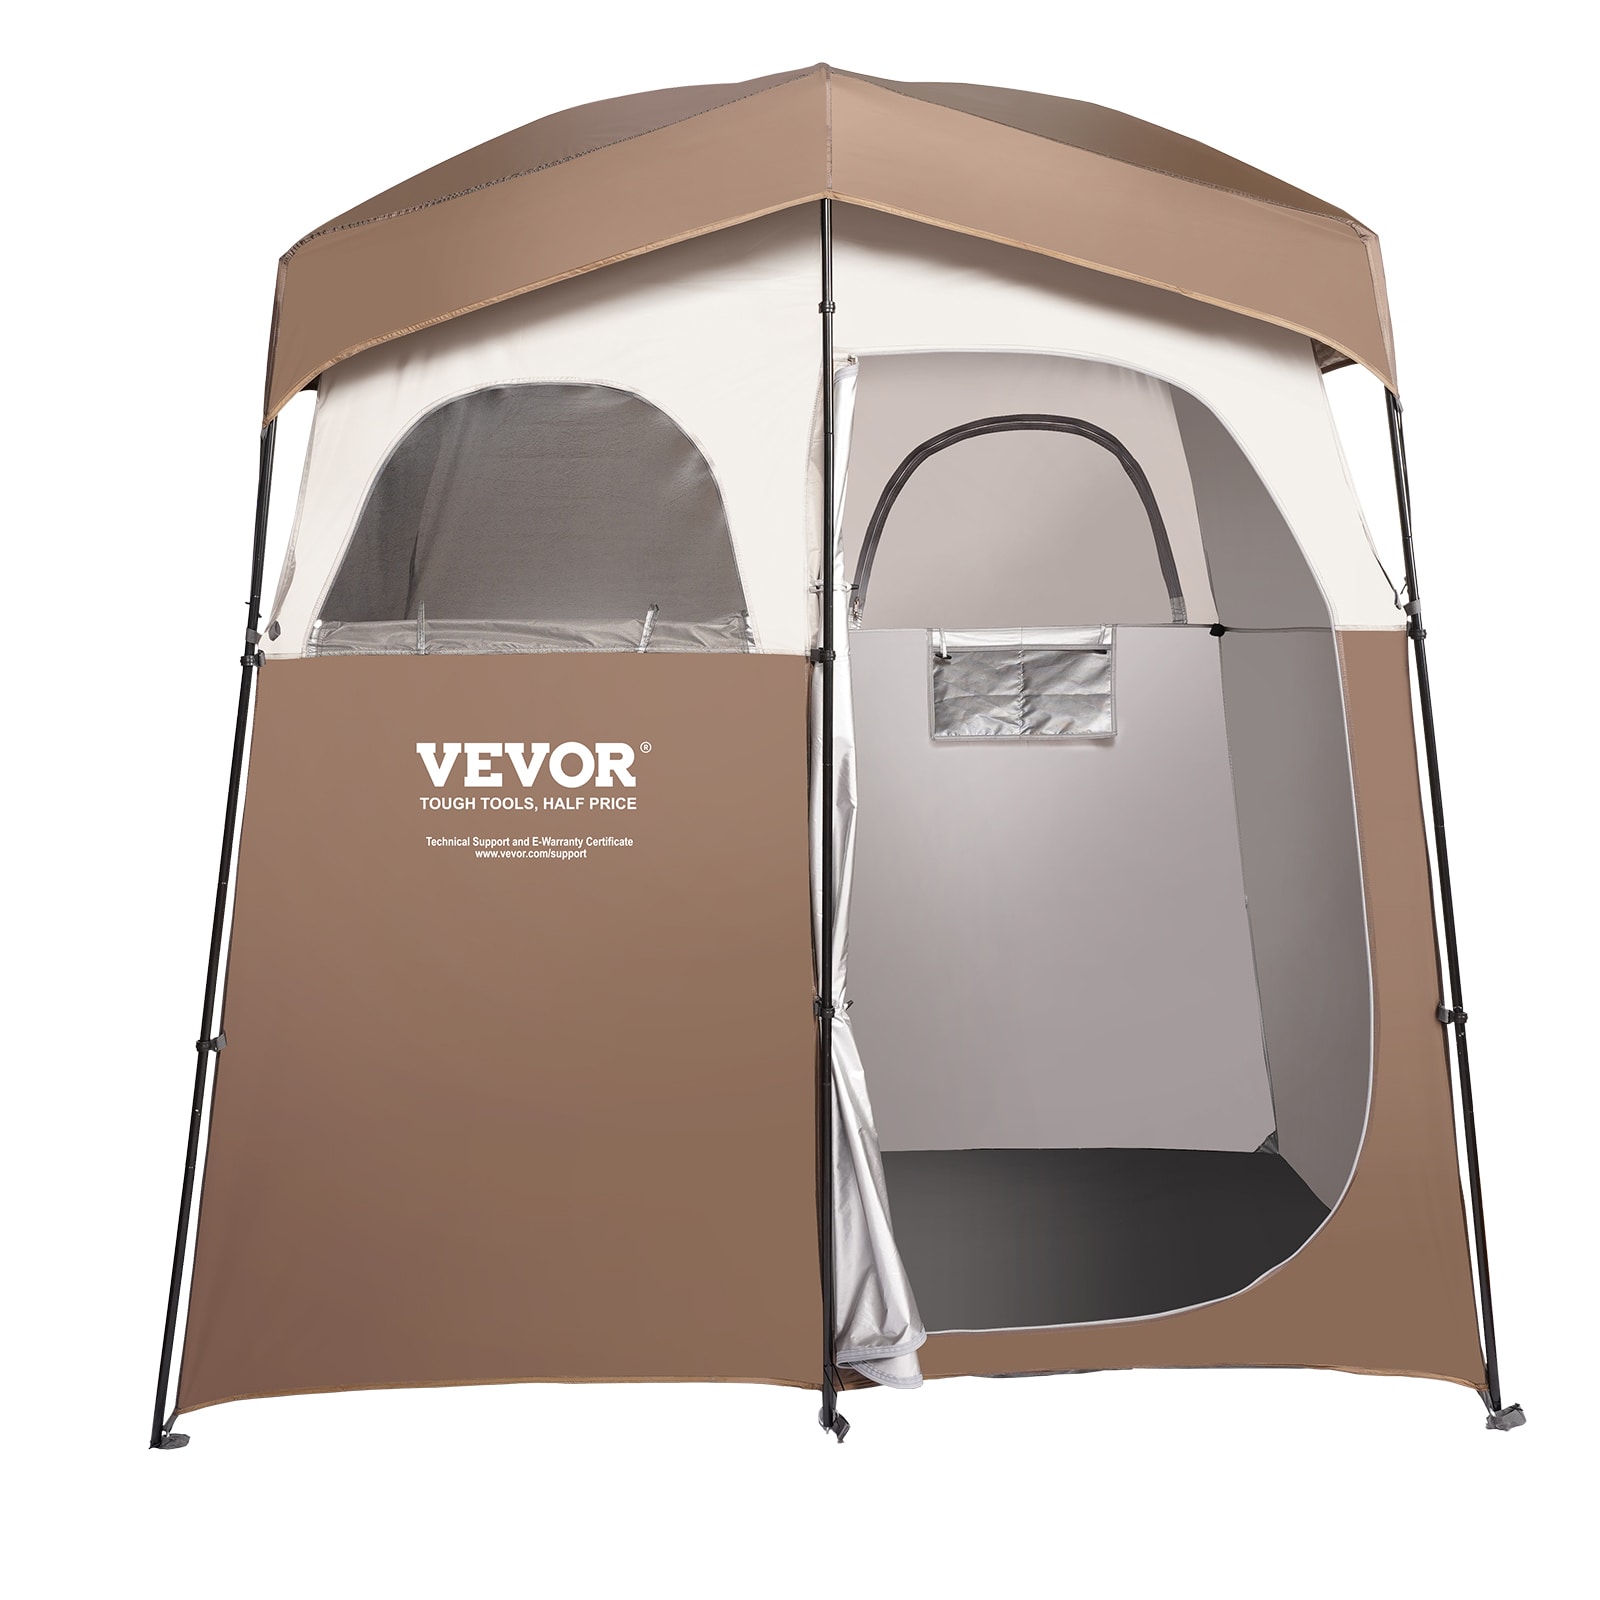 VEVOR Privacy Tent: Oversize Portable Shower Shelter with 2 Rooms